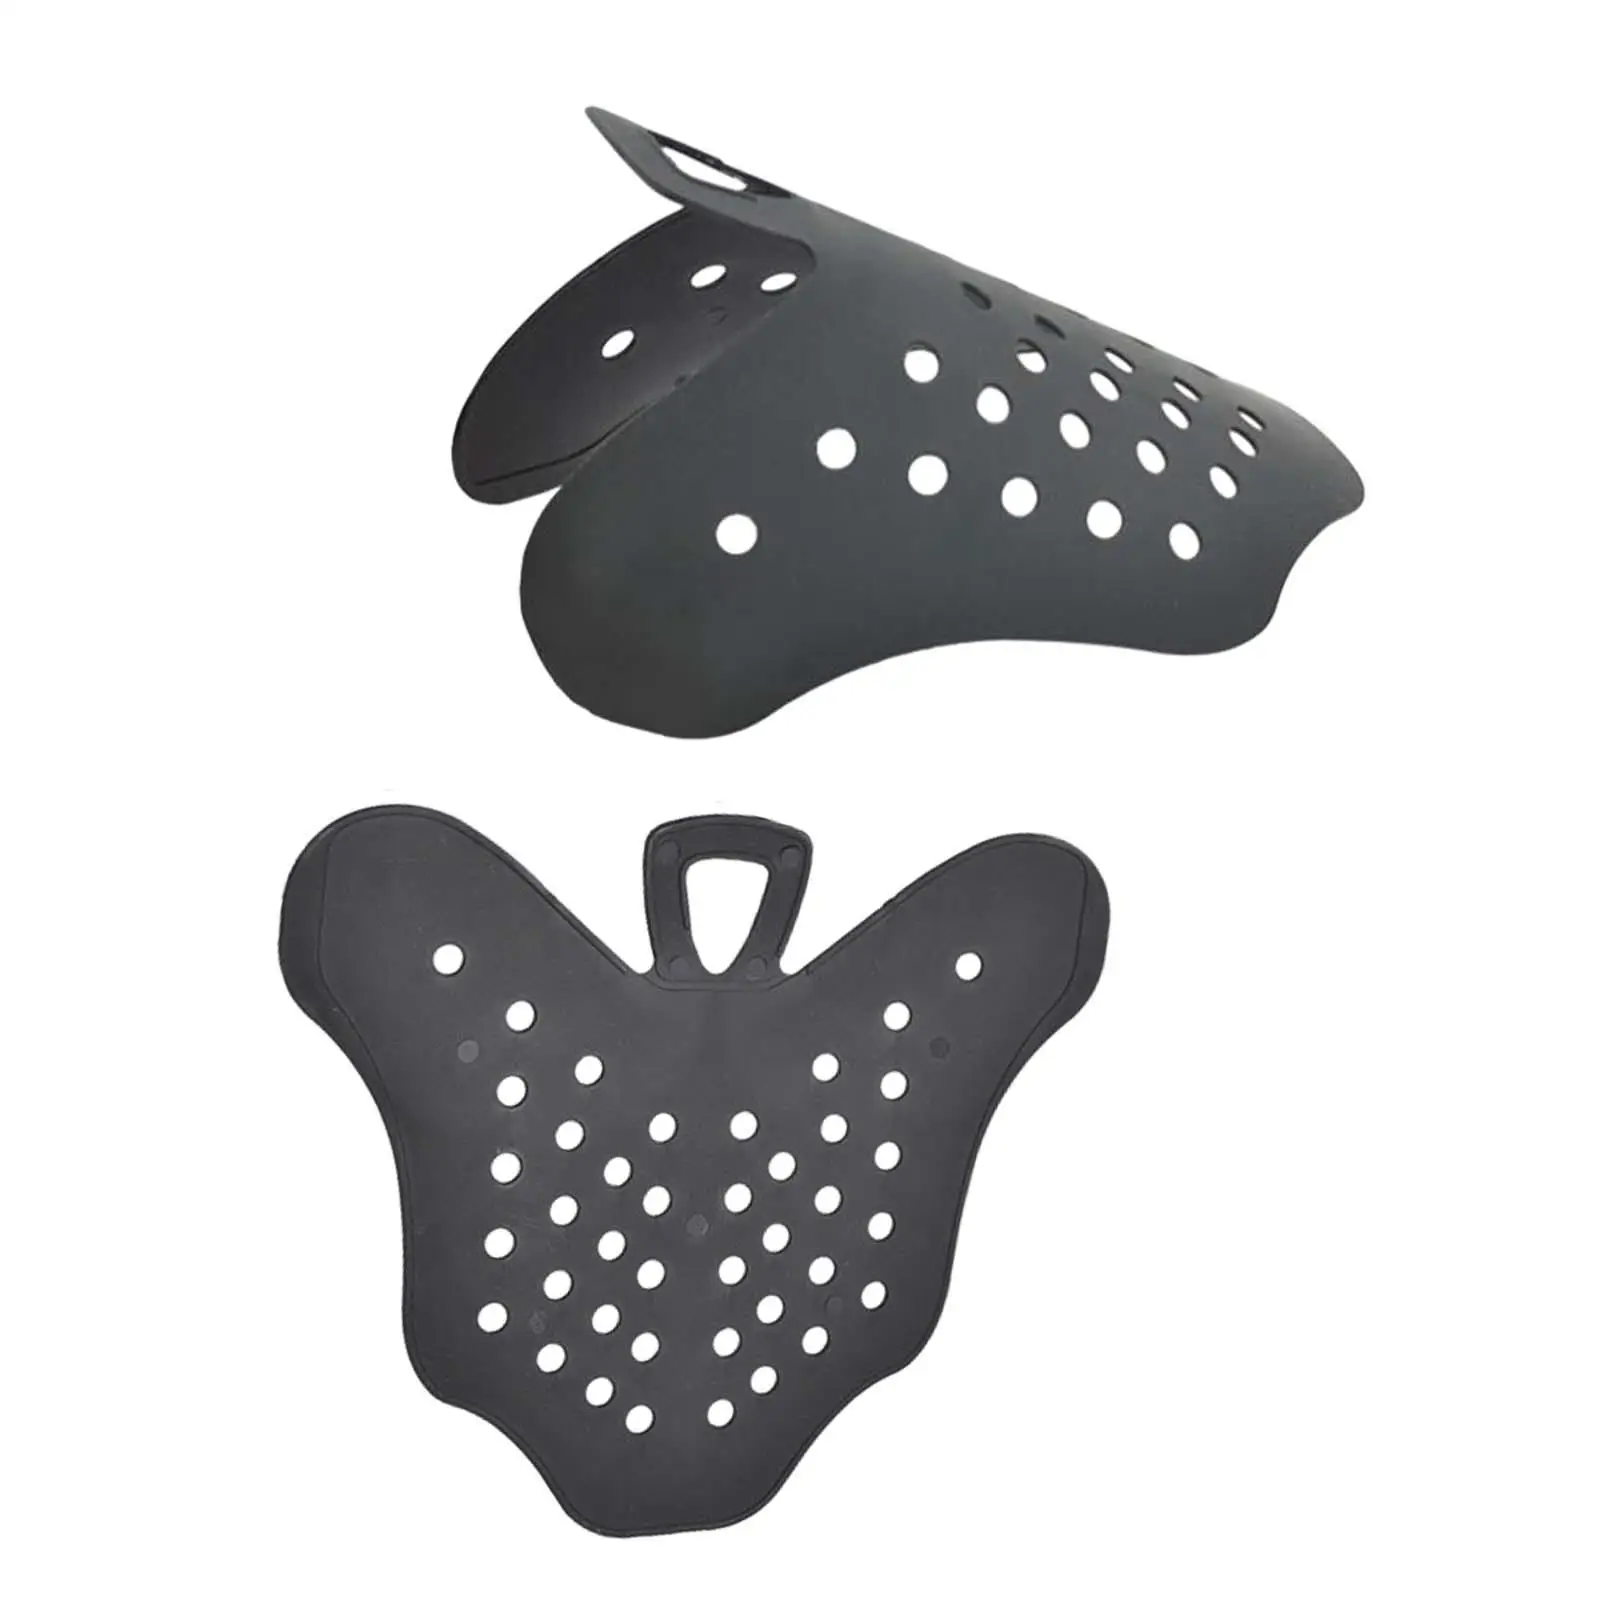 Flip Fin Practical Snorkeling Flippers Insert for Fins for Swim Womens Adult Diving Fins Shoes Support Easy to Use Maintain